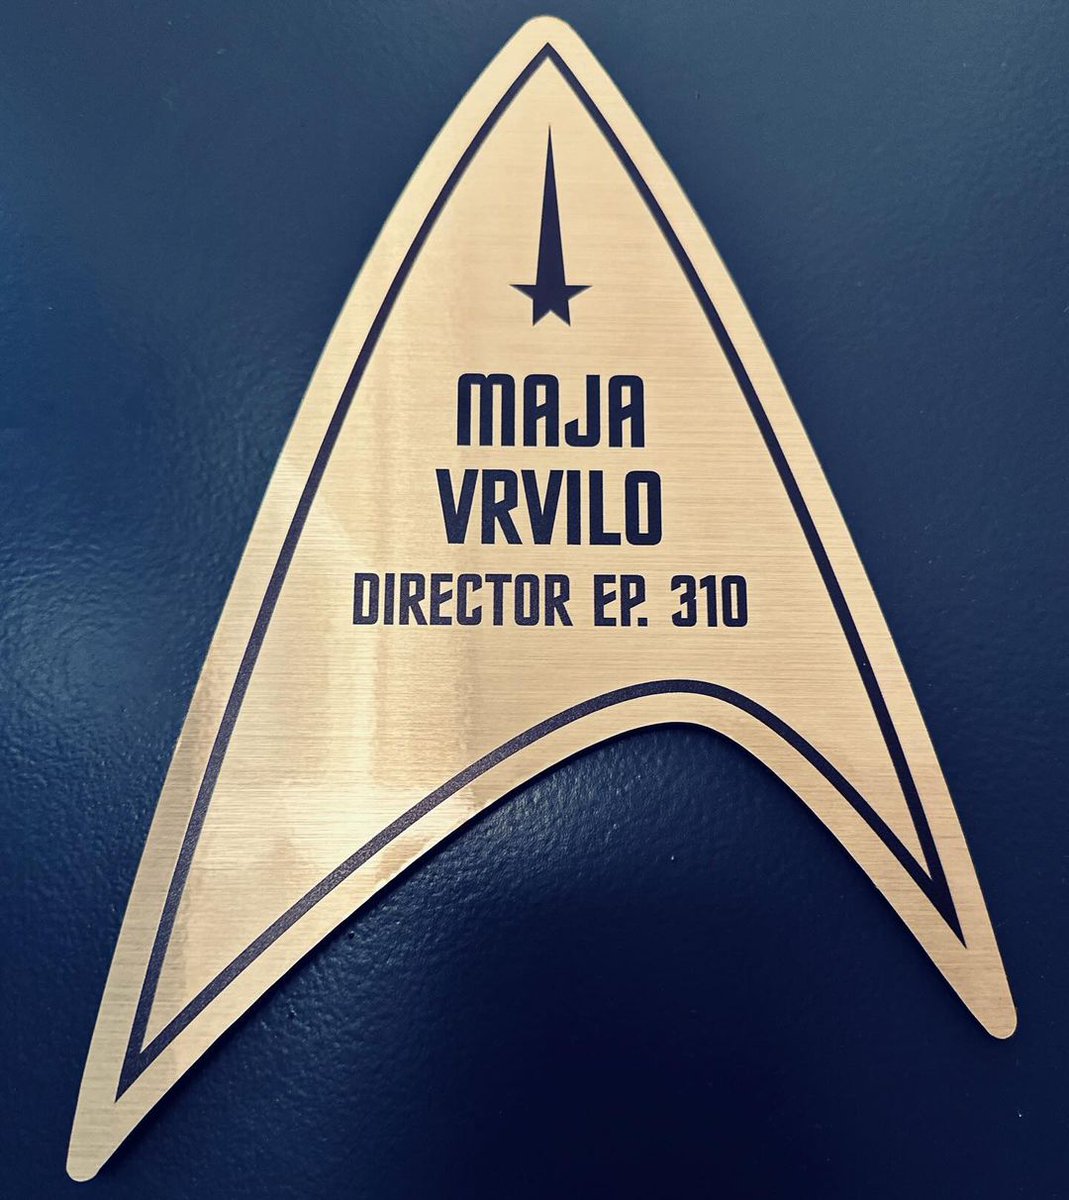 🚨NEW - SNW S3 UPDATES! #StrangeNewWorlds is heading towards the end of filming on Season 3, though we're not due to get it until 2025. Director Jordan Canning is finishing up on Episode 8 & shared a photo, & Maja Vrvilo reveal she's directing the season finale! #StarTrek